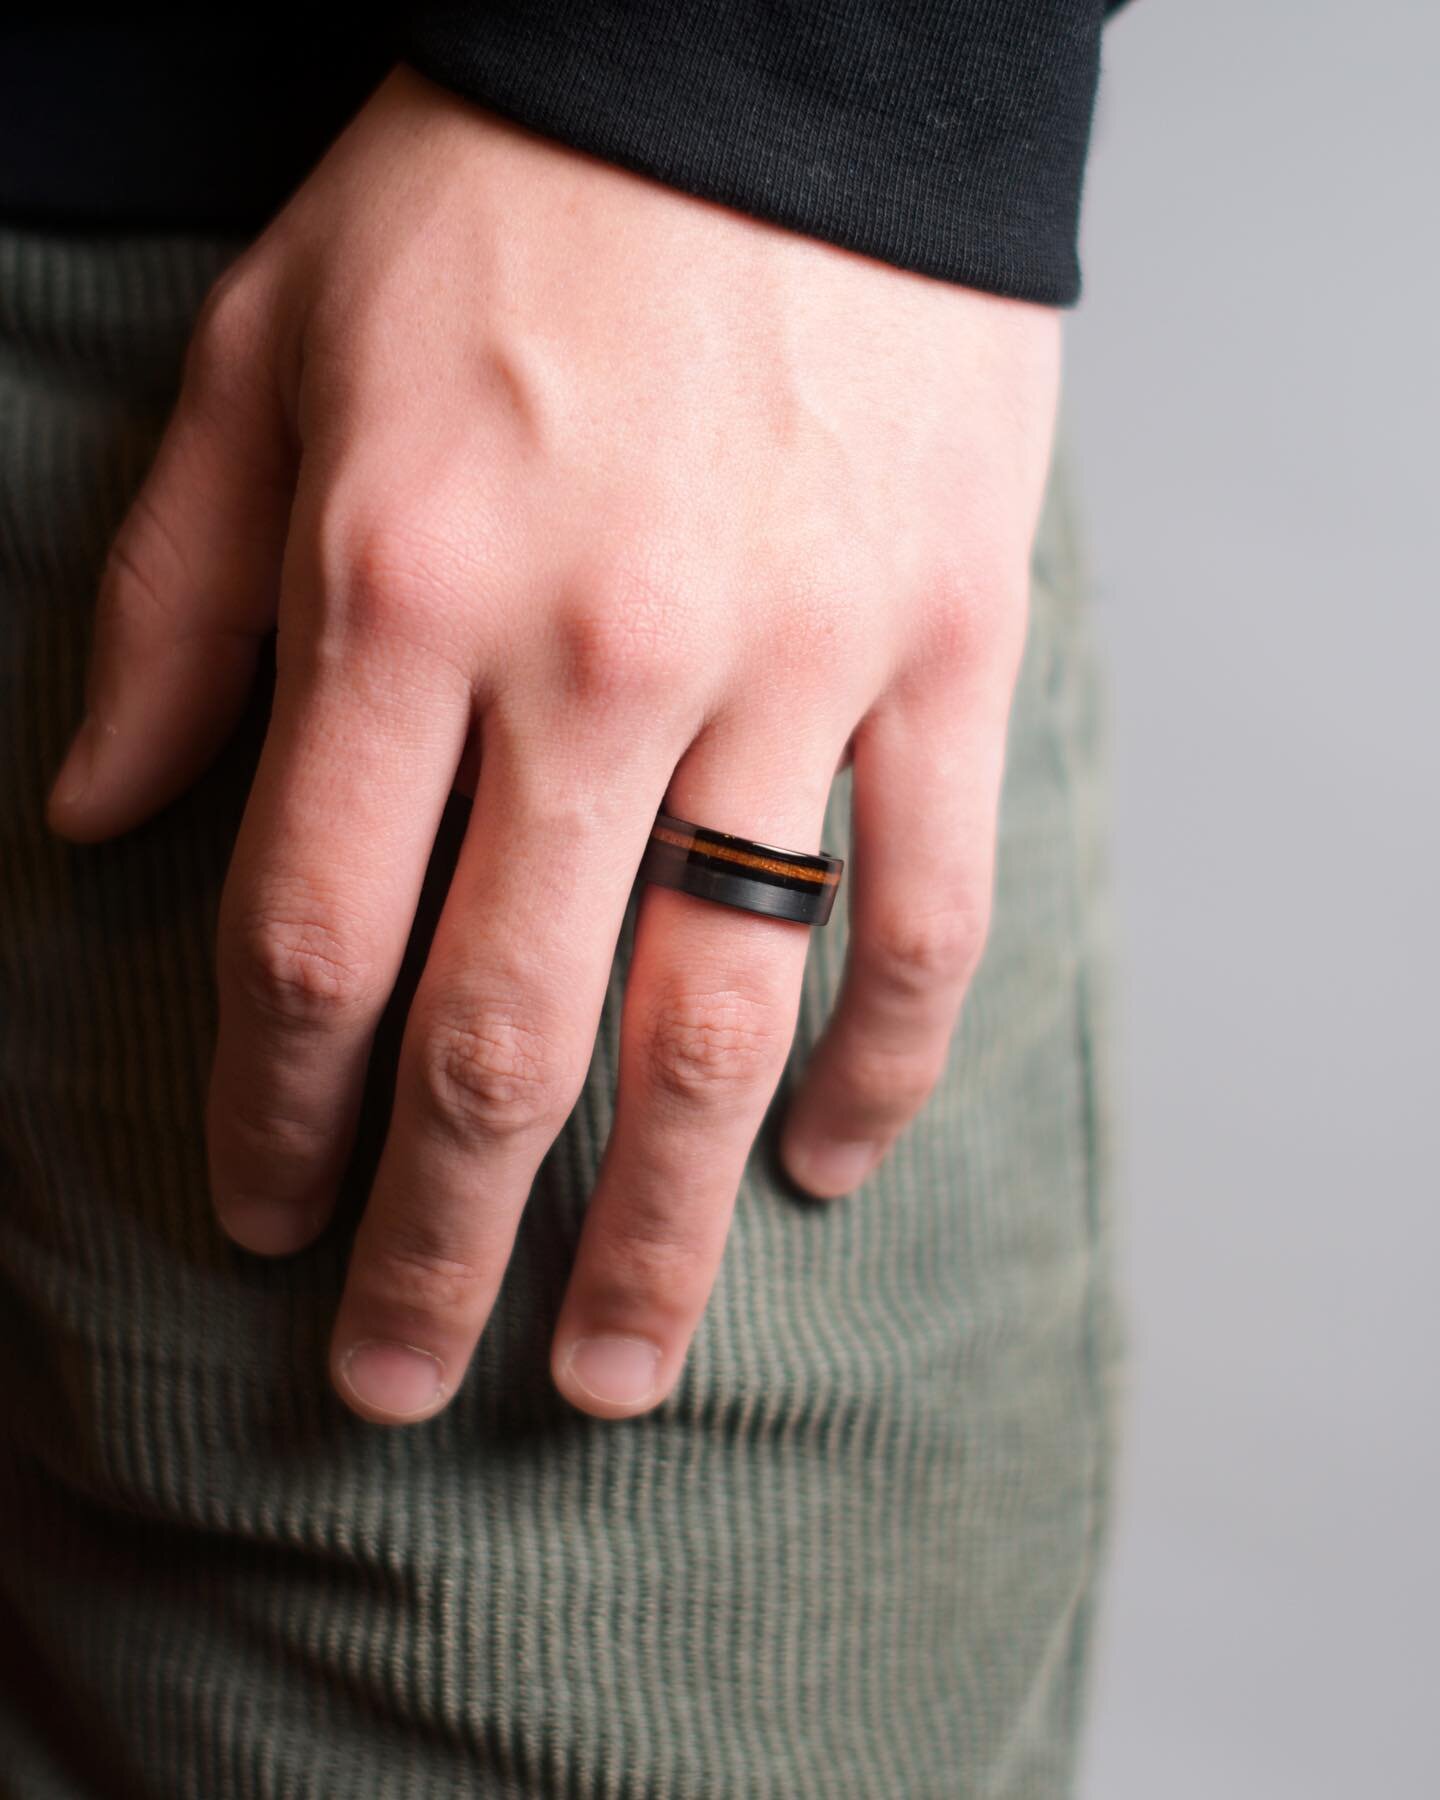 Looking for high quality men&rsquo;s rings that won&rsquo;t break the bank?💵 We got you! Head on over to our website or in person to shop our men&rsquo;s collection. 

www.supersilvercda.com

#koawoodrings #mensjewelry #supersilvercda #downtowncda #